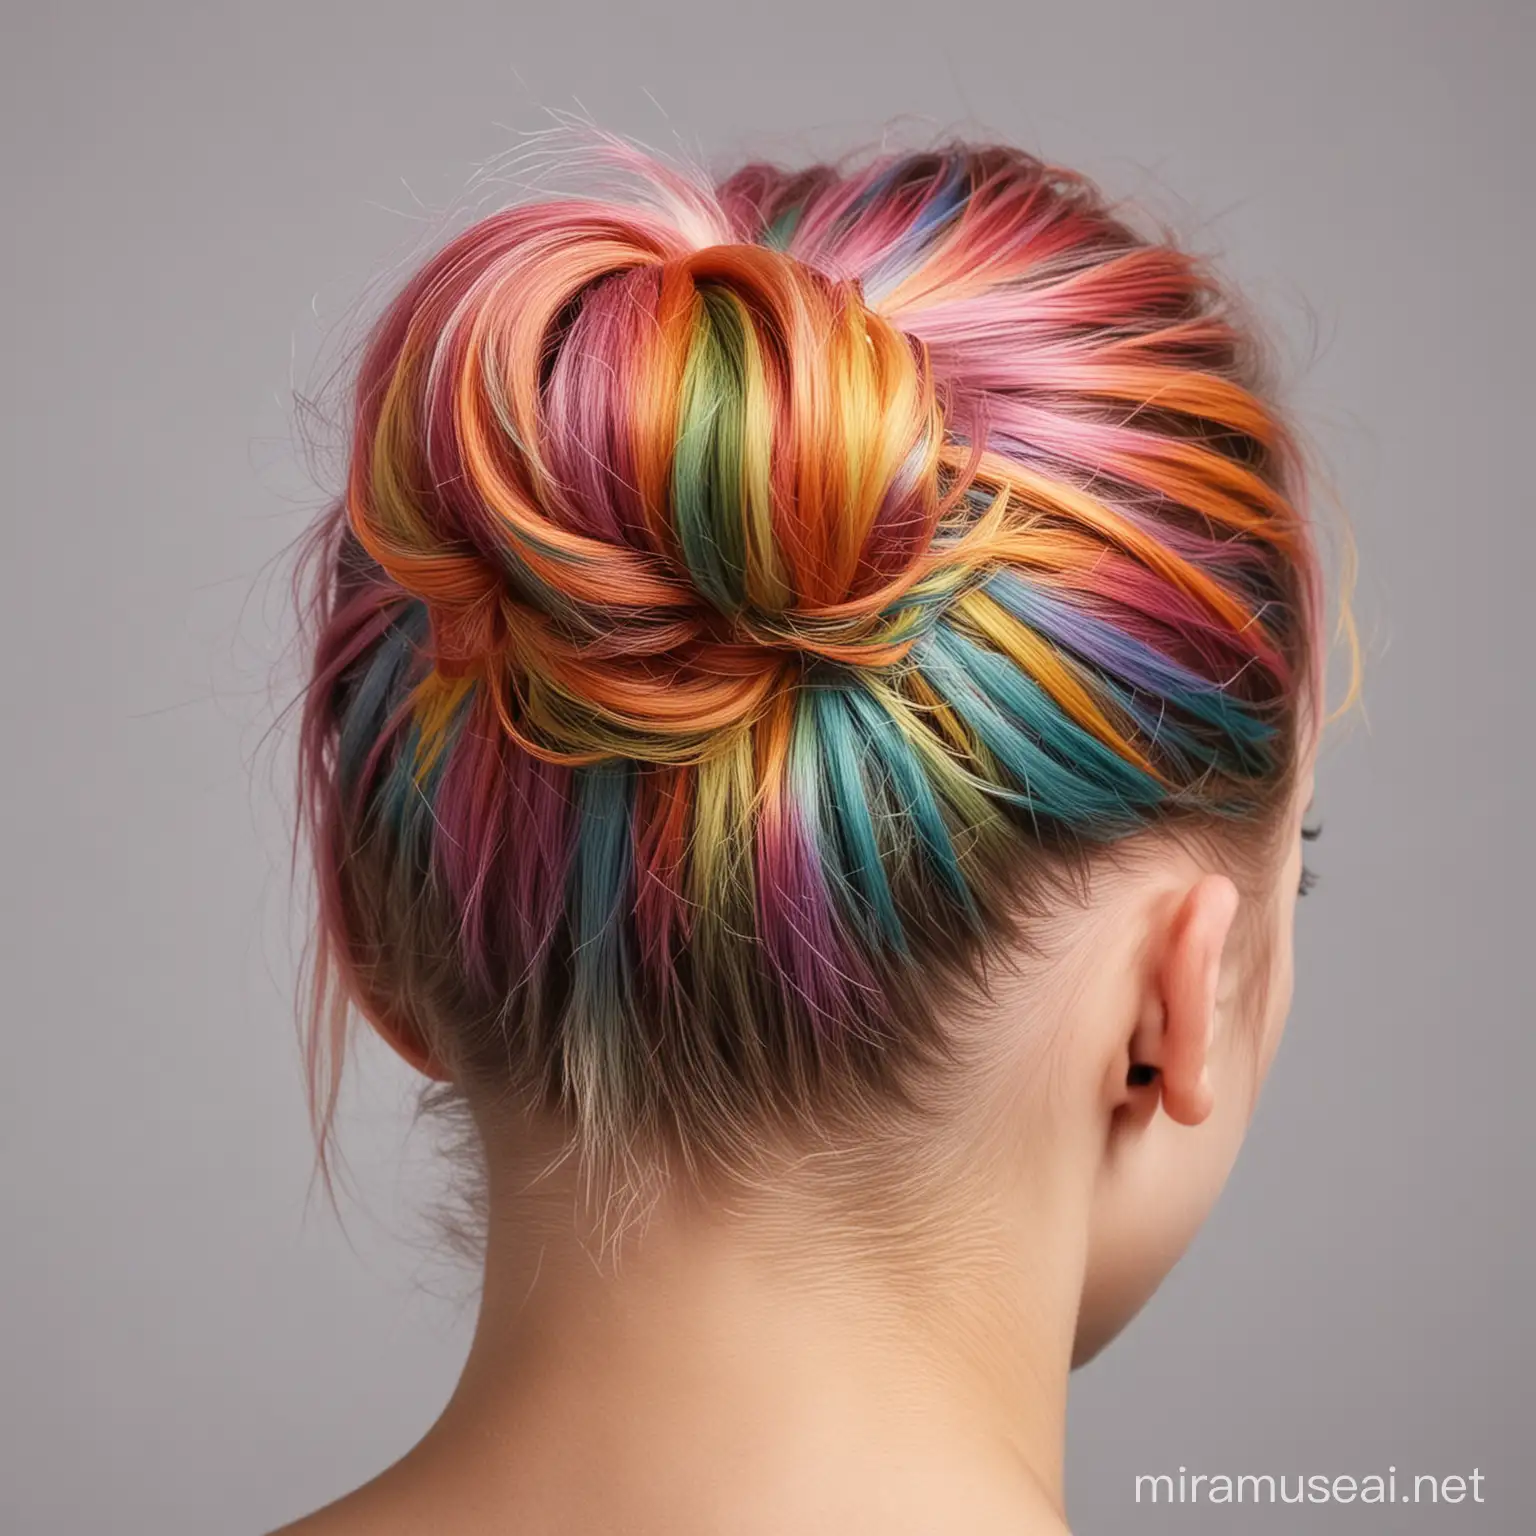 Vibrant Rainbow Hair Tied Neatly CloseUp Portrait of Young Girls Colorful Hairstyle